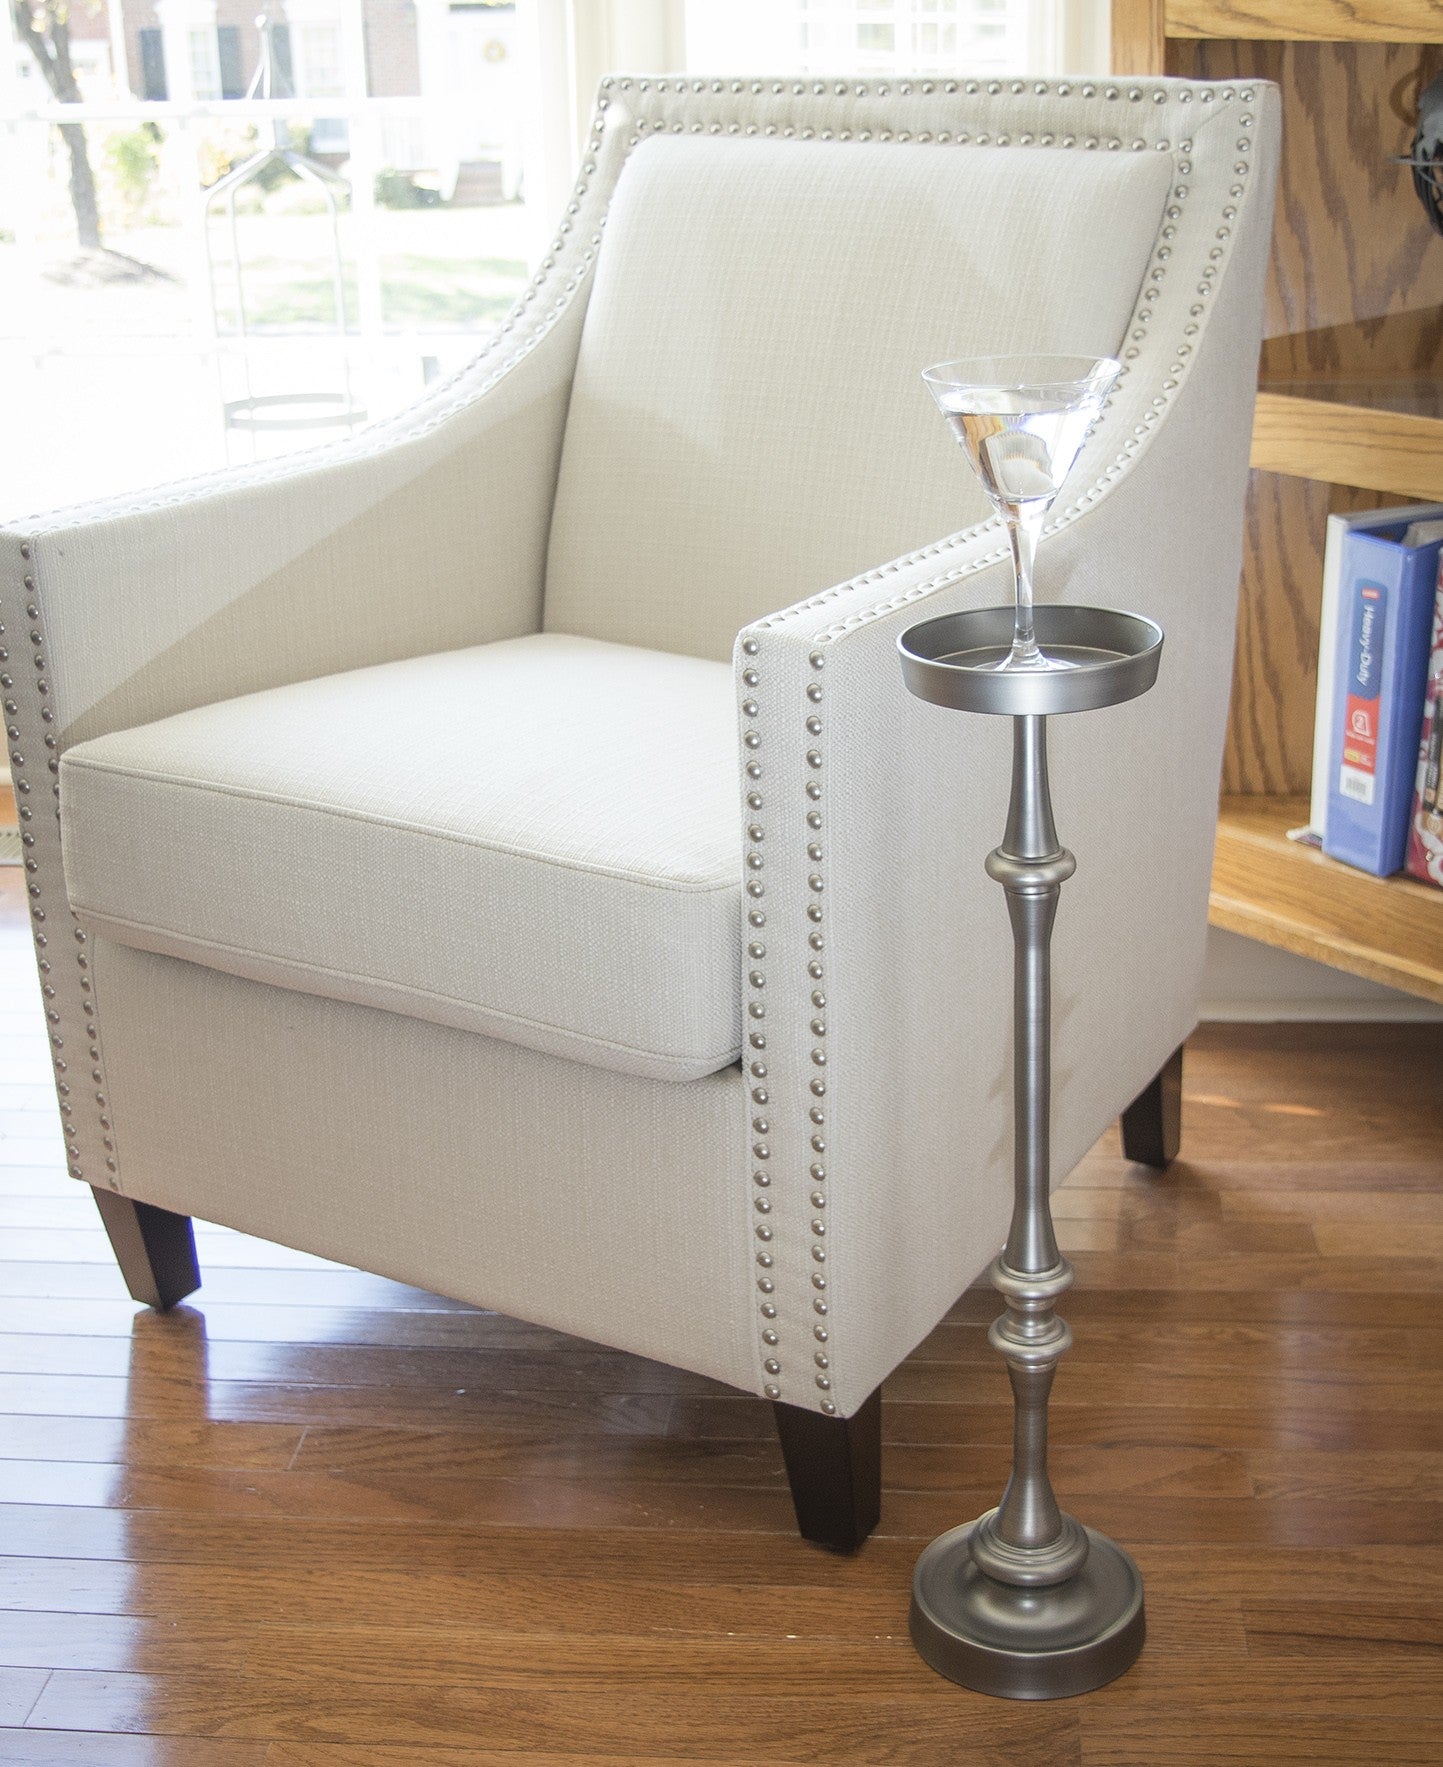 Brushed Silver Finish Drink Size Accent Table